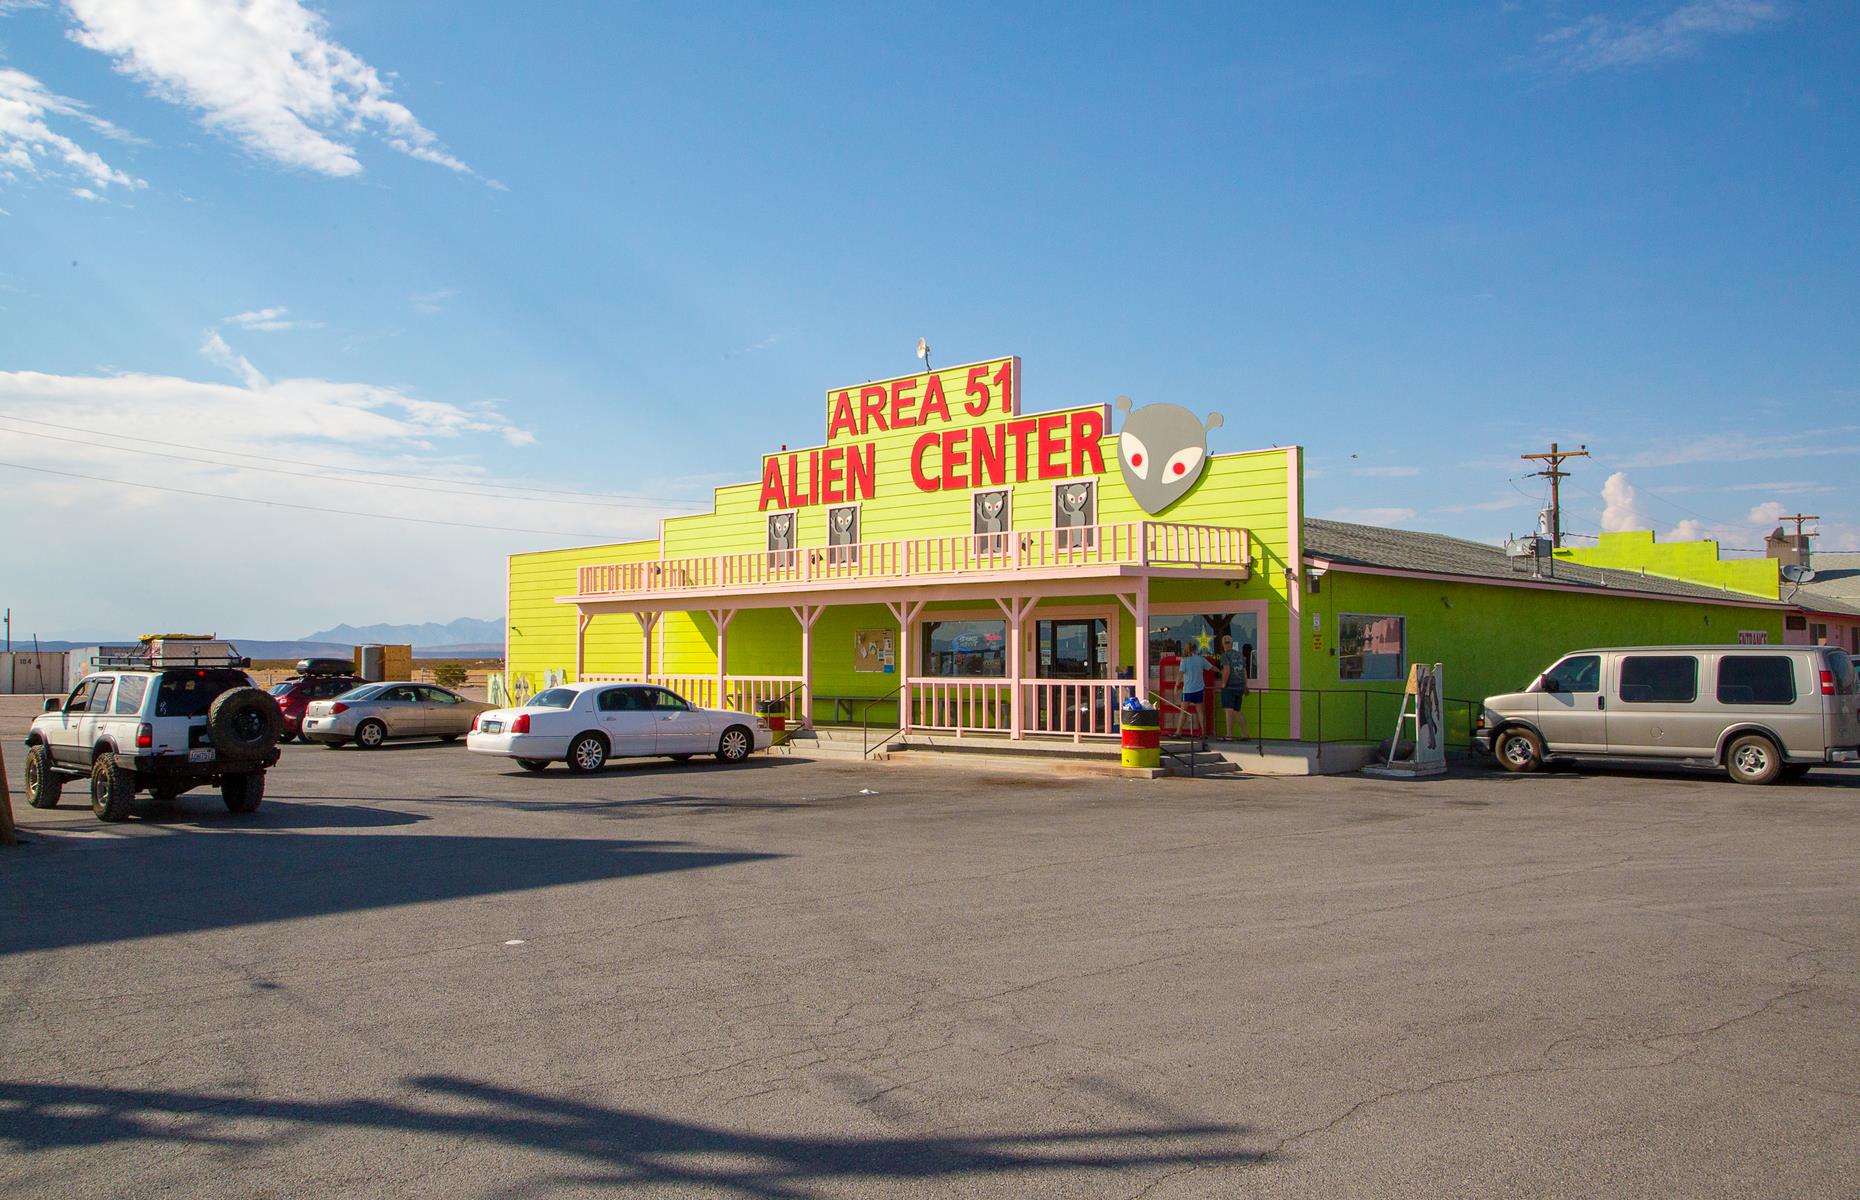 <p>Between Death Valley National Park and Las Vegas, Area 51 Alien Center is an out-of-this-world pit stop in the desert. A cracking photo opportunity, it’s a lime green alien-themed gift shop with a small but unexpectedly good diner attached. Stop in for an Alien Burger (with cheese and sautéed mushrooms) and <a href="https://www.yelp.com/biz/area-51-alien-travel-center-amargosa-valley?sort_by=date_desc">skeleton-shaped vodka bottles.</a></p>